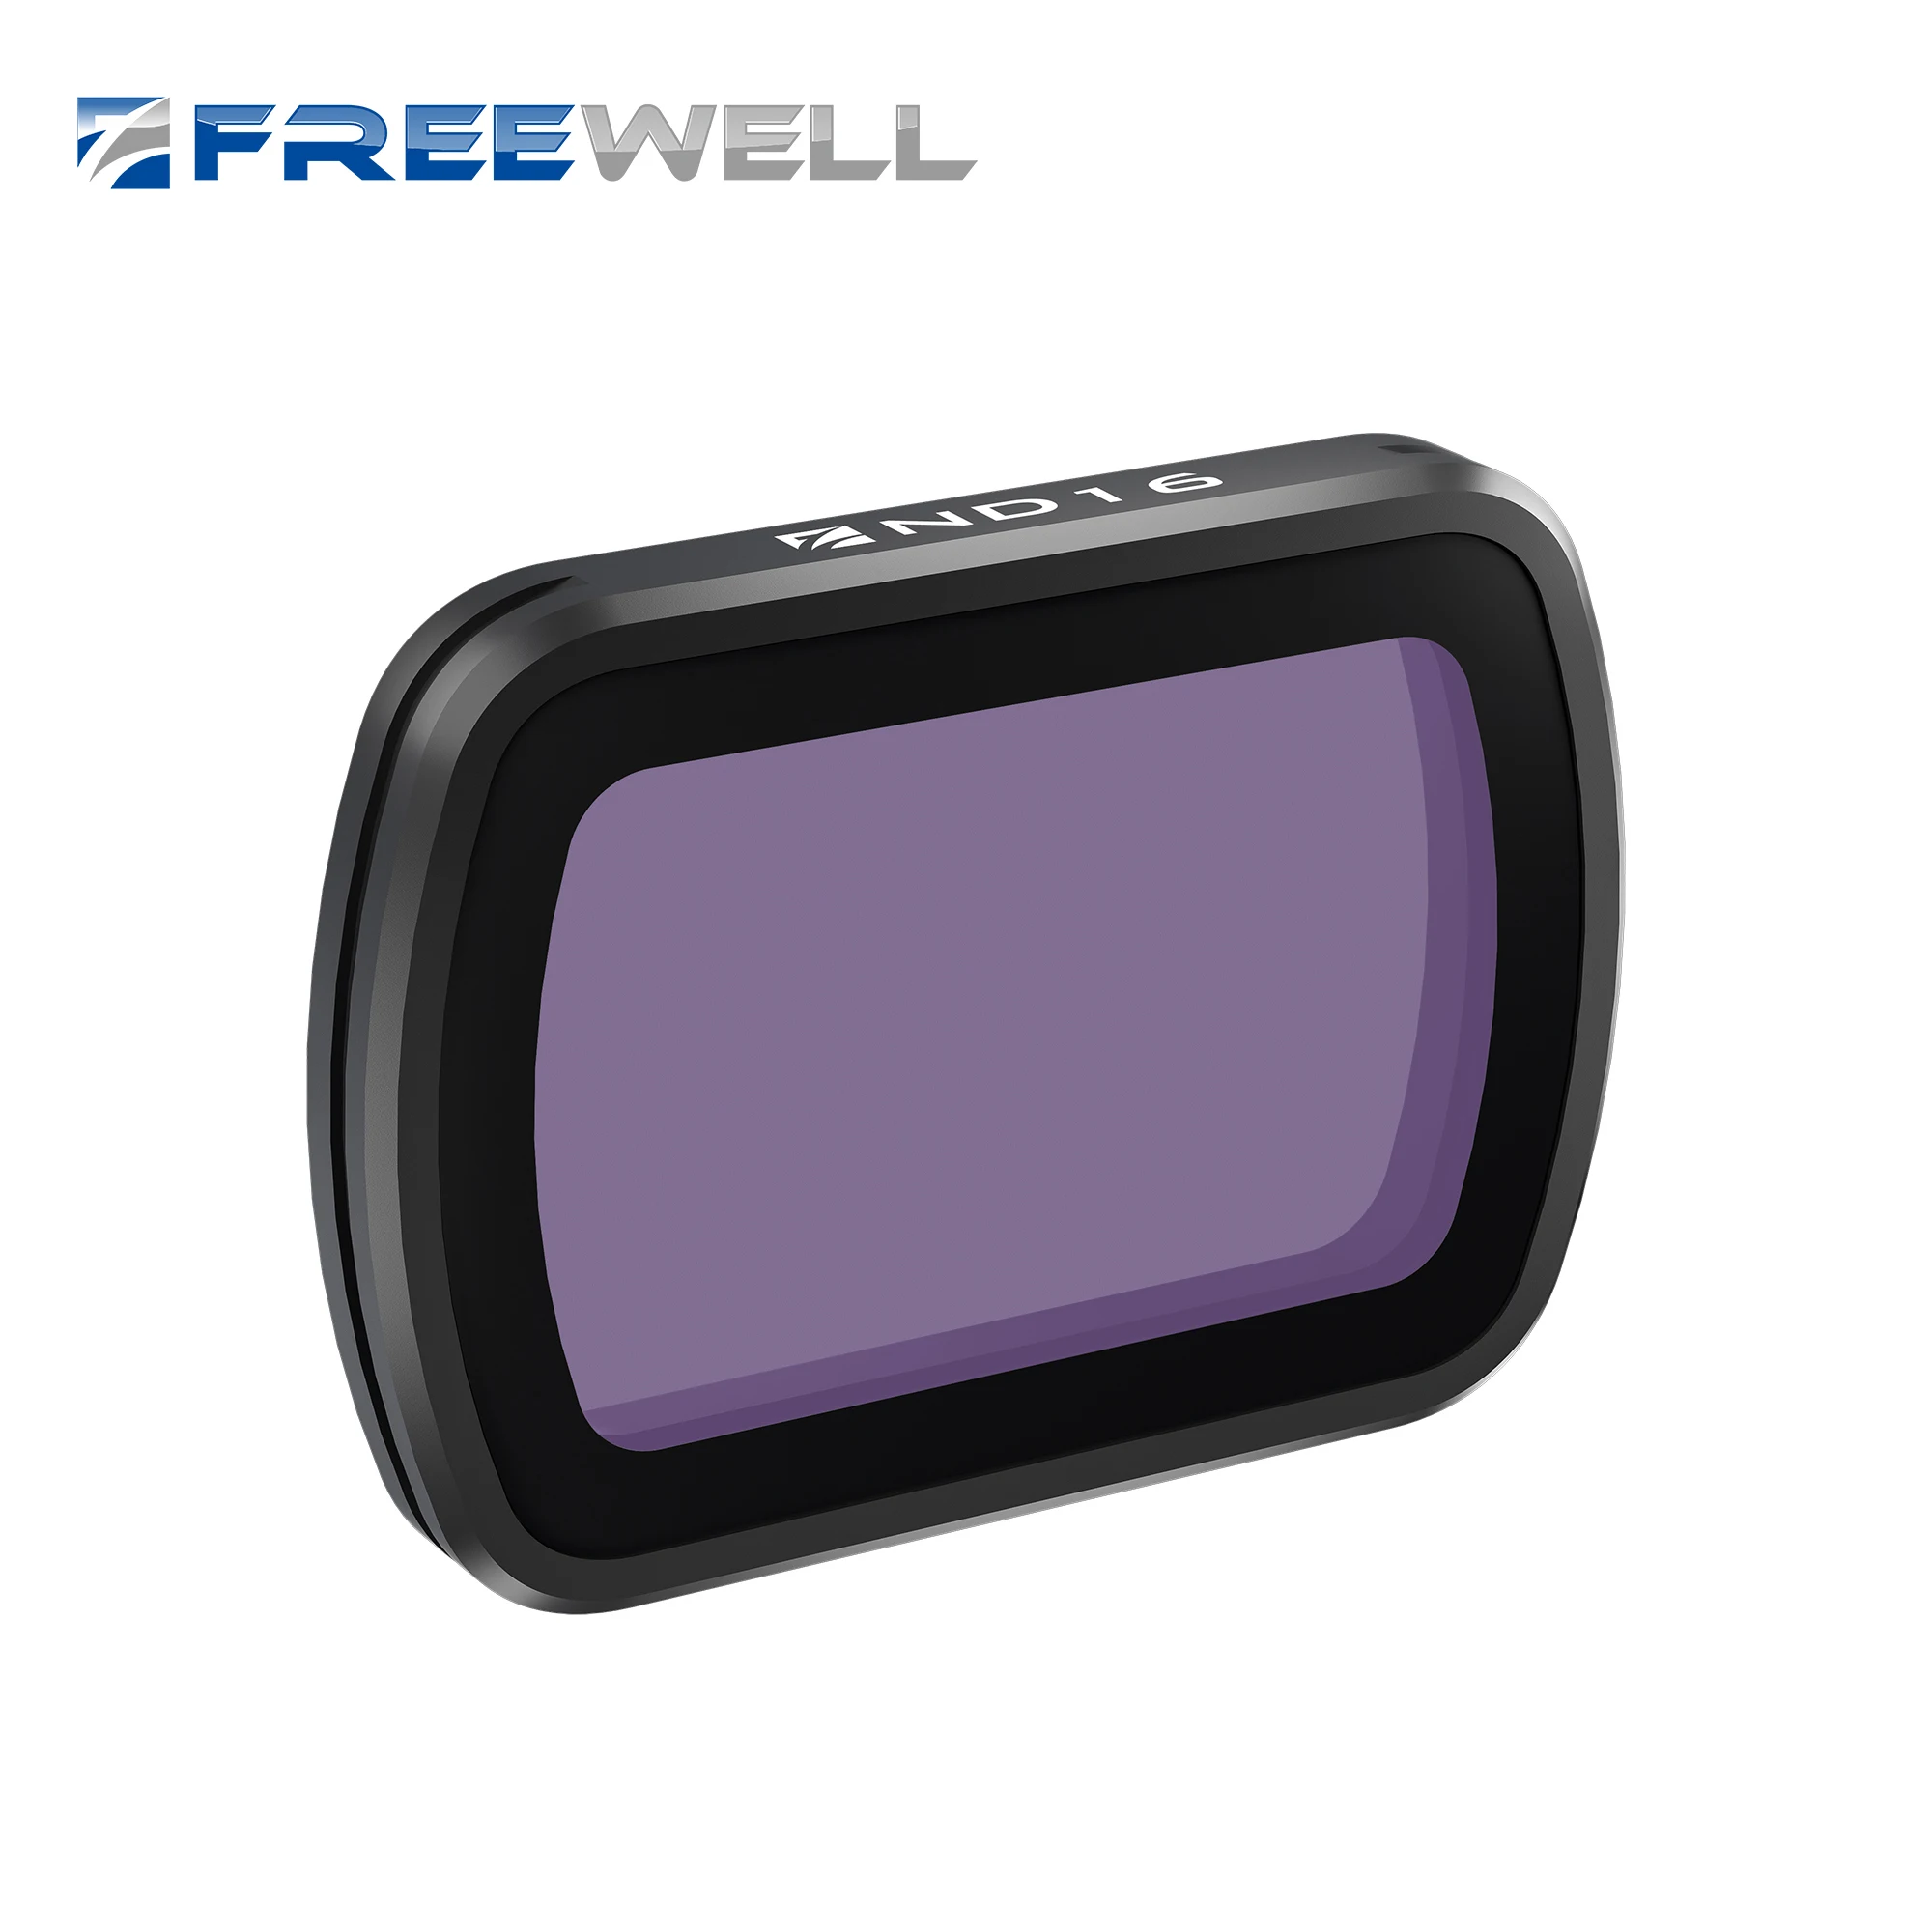 

Freewell Neutral Density Filter for Osmo Pocket 3 - Neutral Color Optics, GimbalSafe Technology